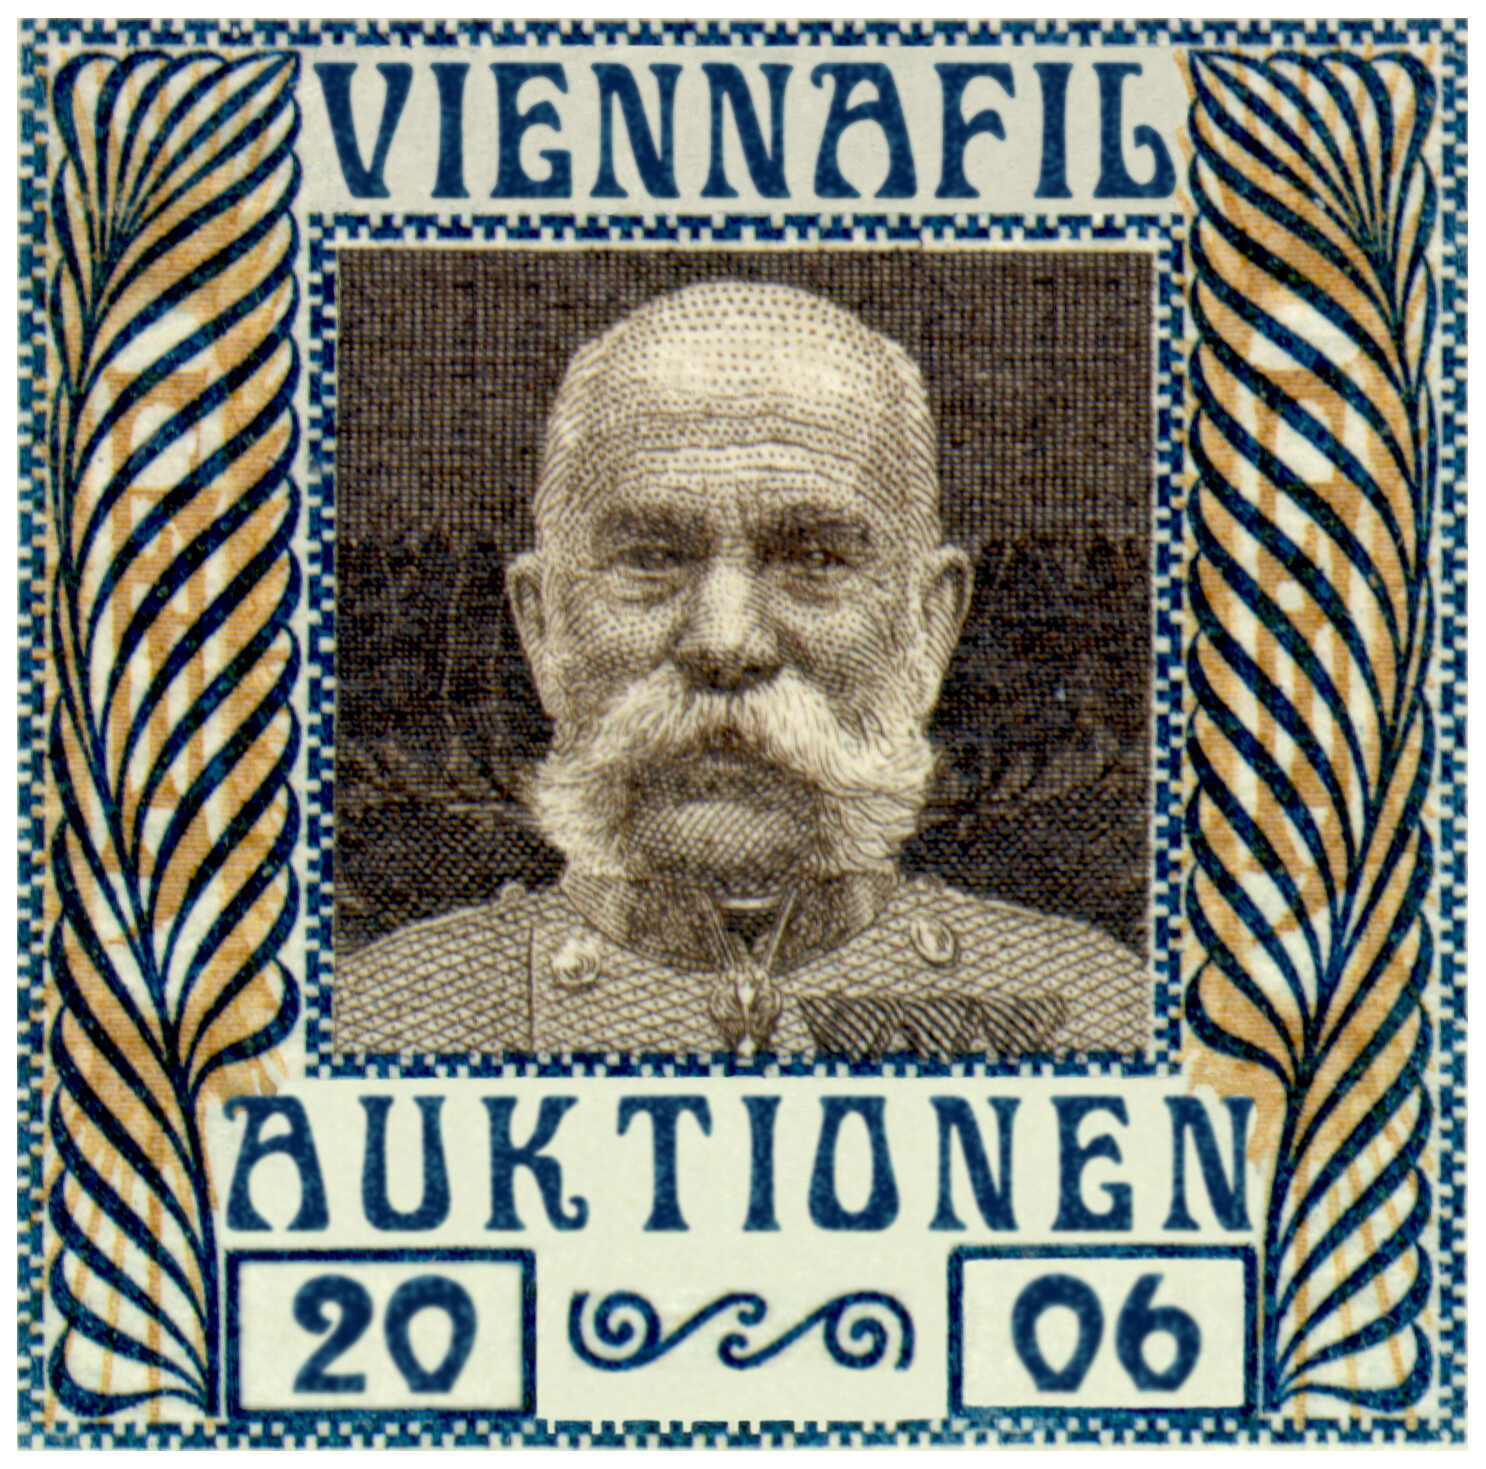 Lot 3632 - other Europe - Germany - Federal Republic of Germany -  Viennafil Auktionen Auction #73 Worldwide Mail Auction: Italy, Austria, Germany, Europe and Overseas